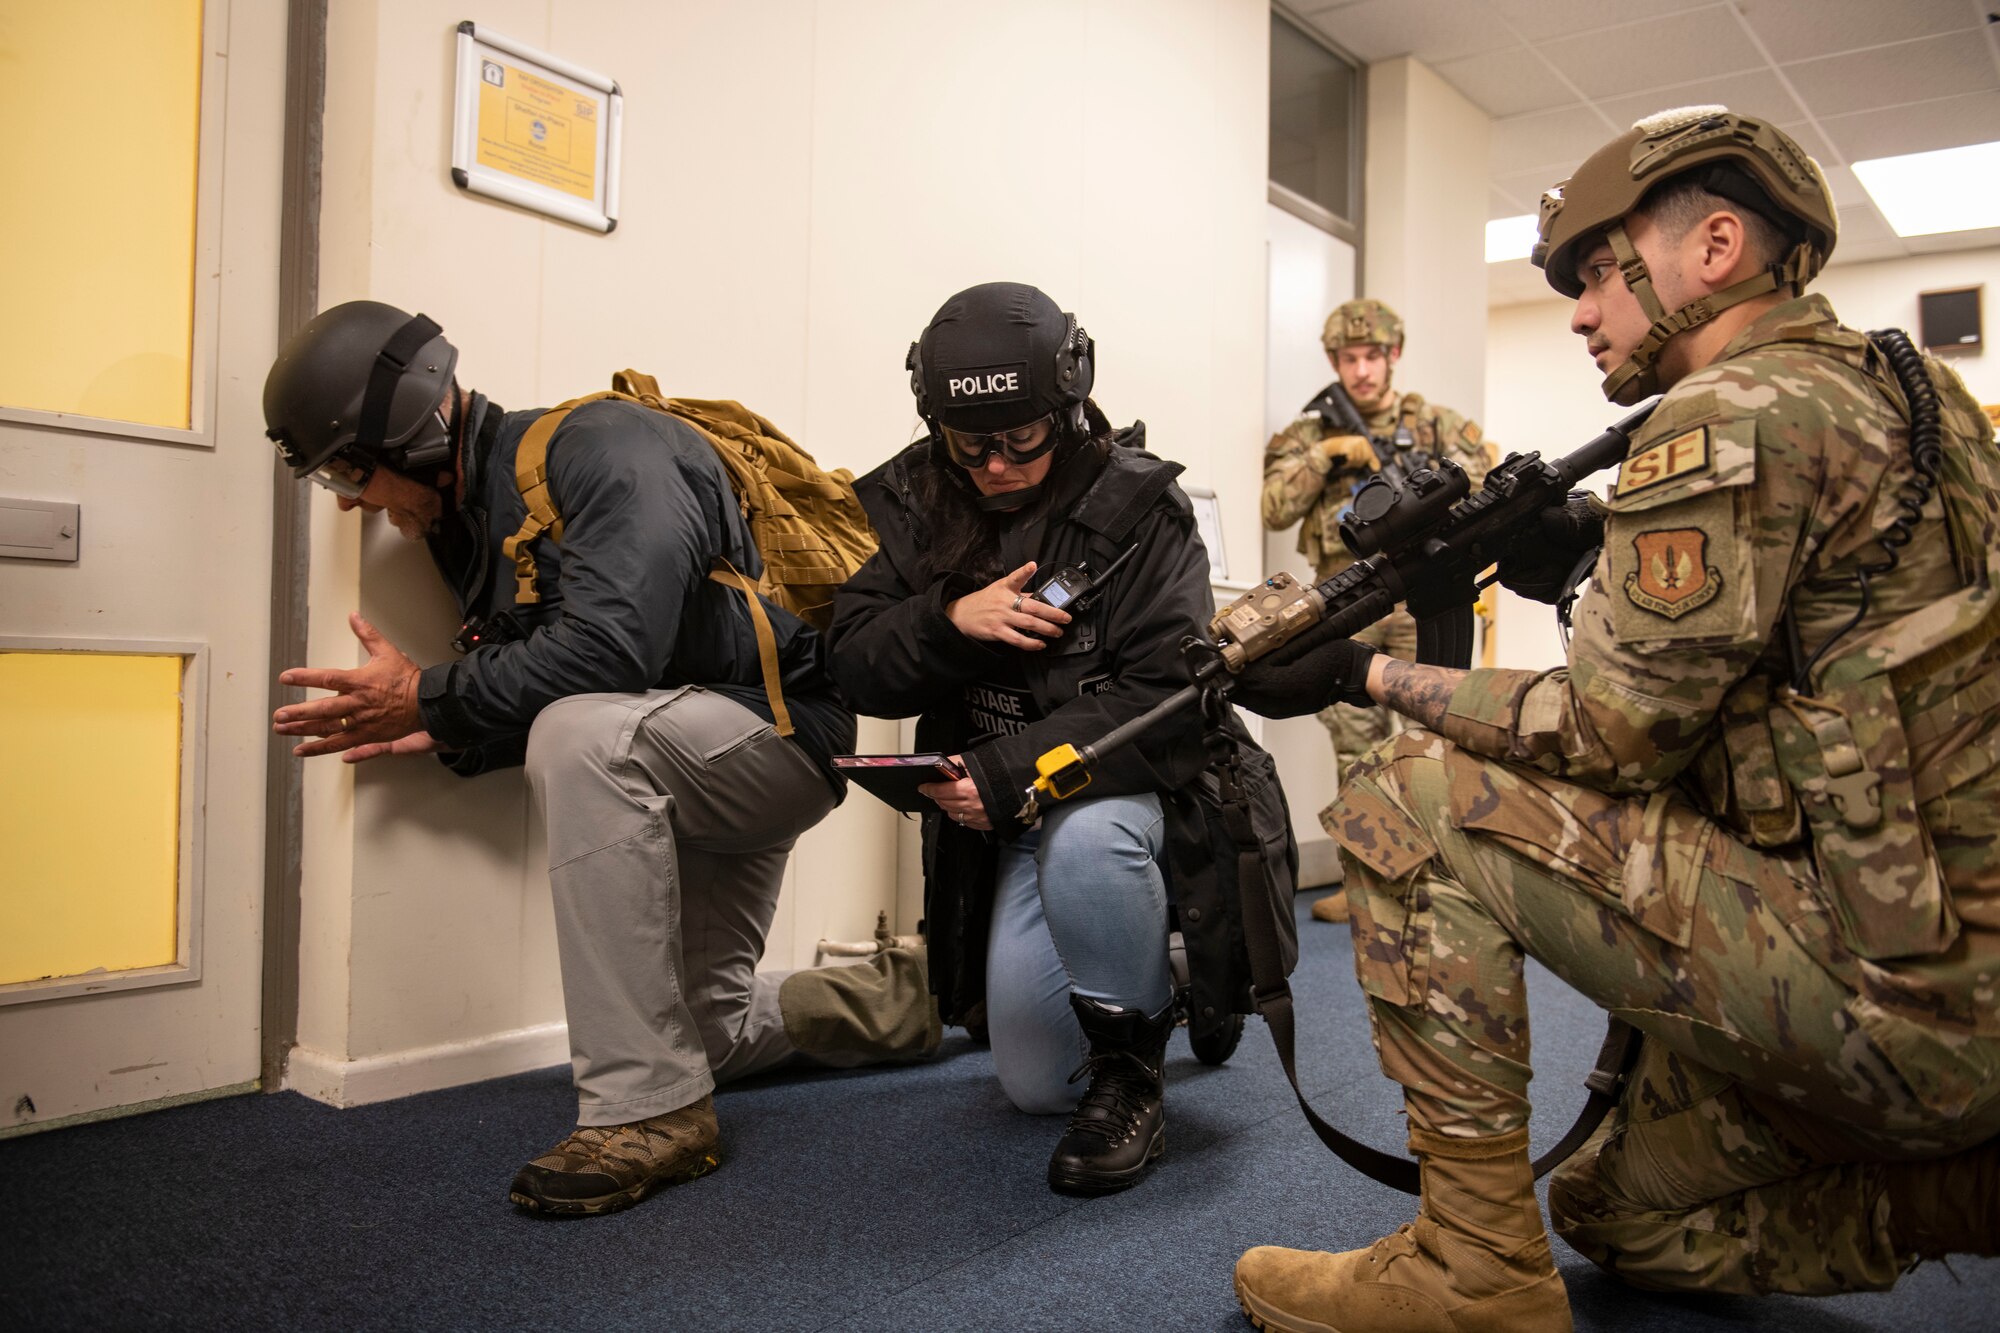 Northamptonshire Police hostage negotiators communicate with a simulated active shooter during an exercise at RAF Croughton